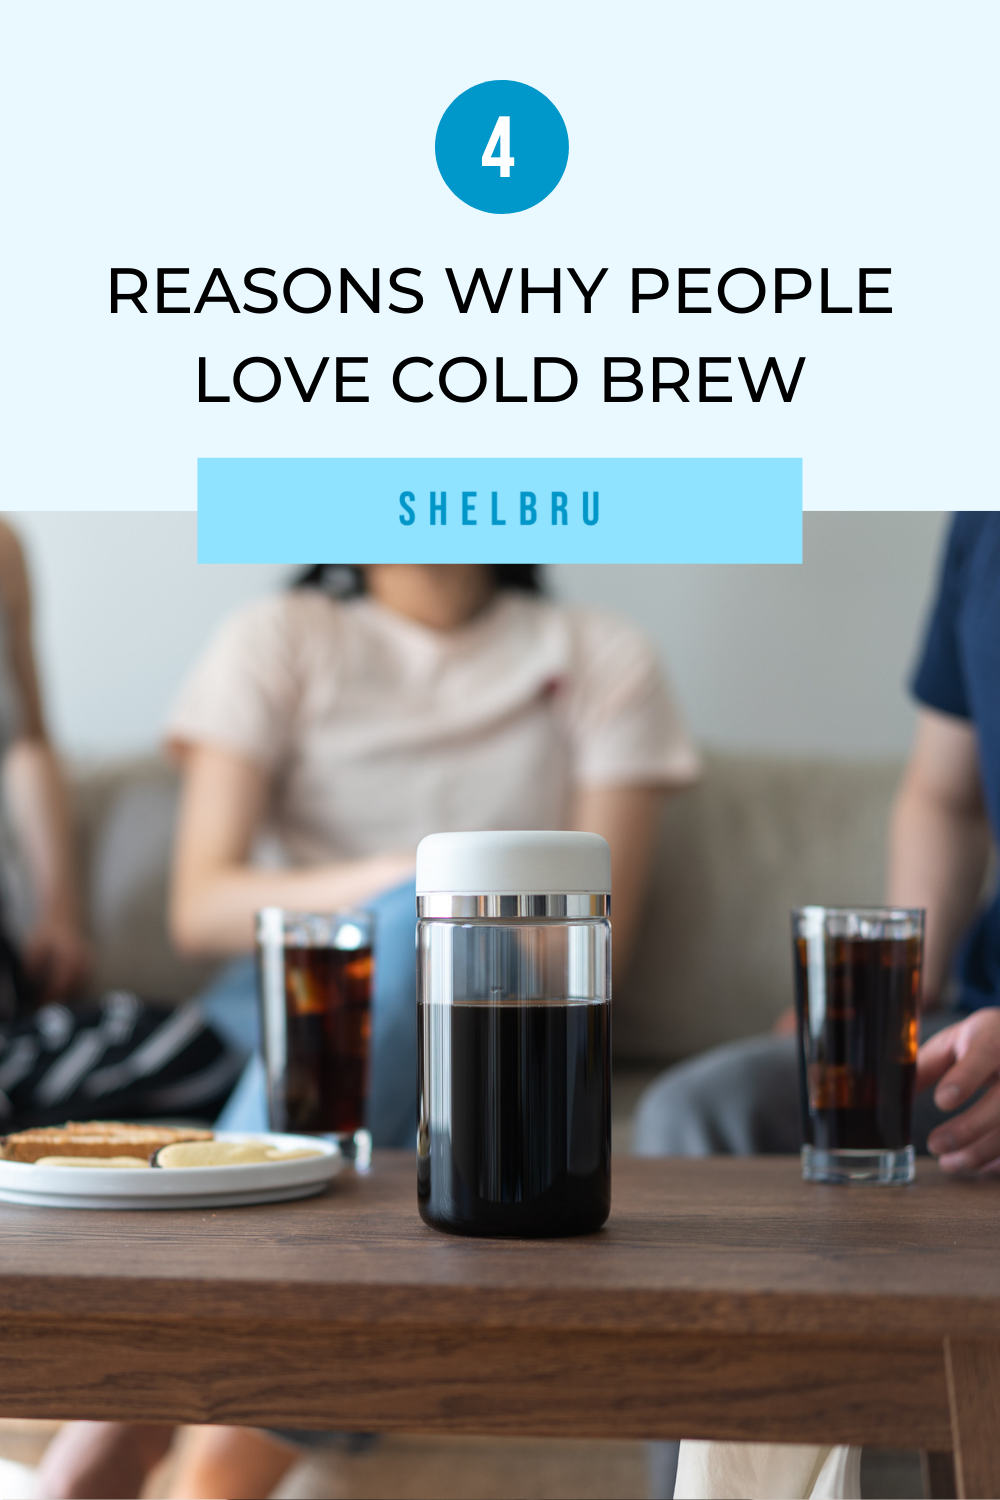 Cold-brewed coffee love.